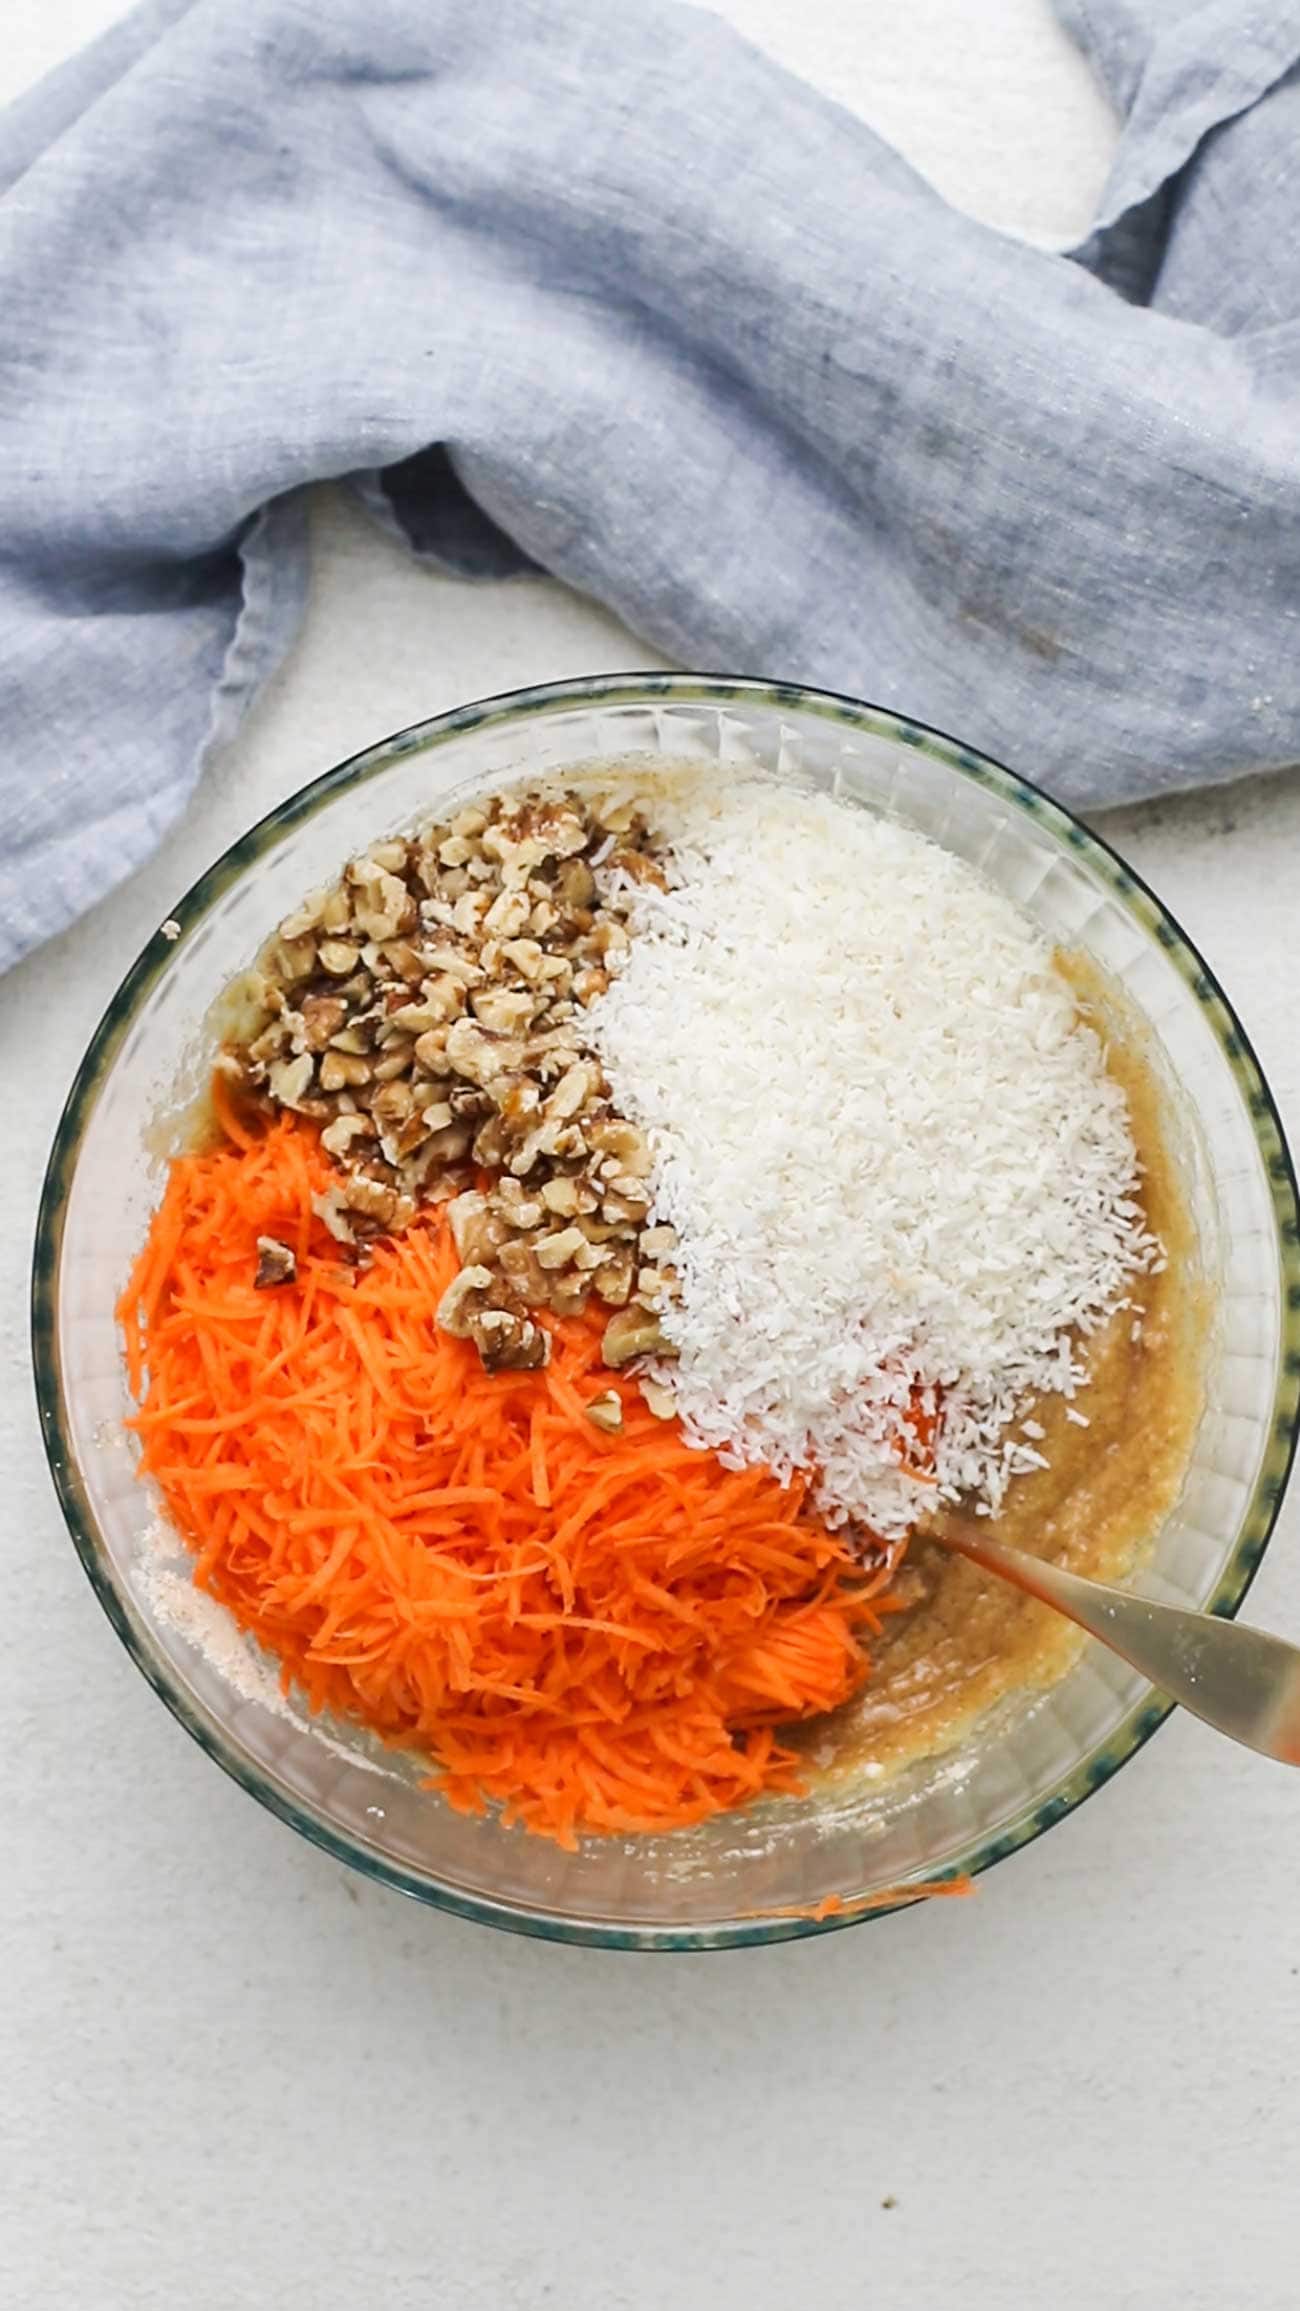 The carrots, walnuts, and coconut being added to the cake mixture.